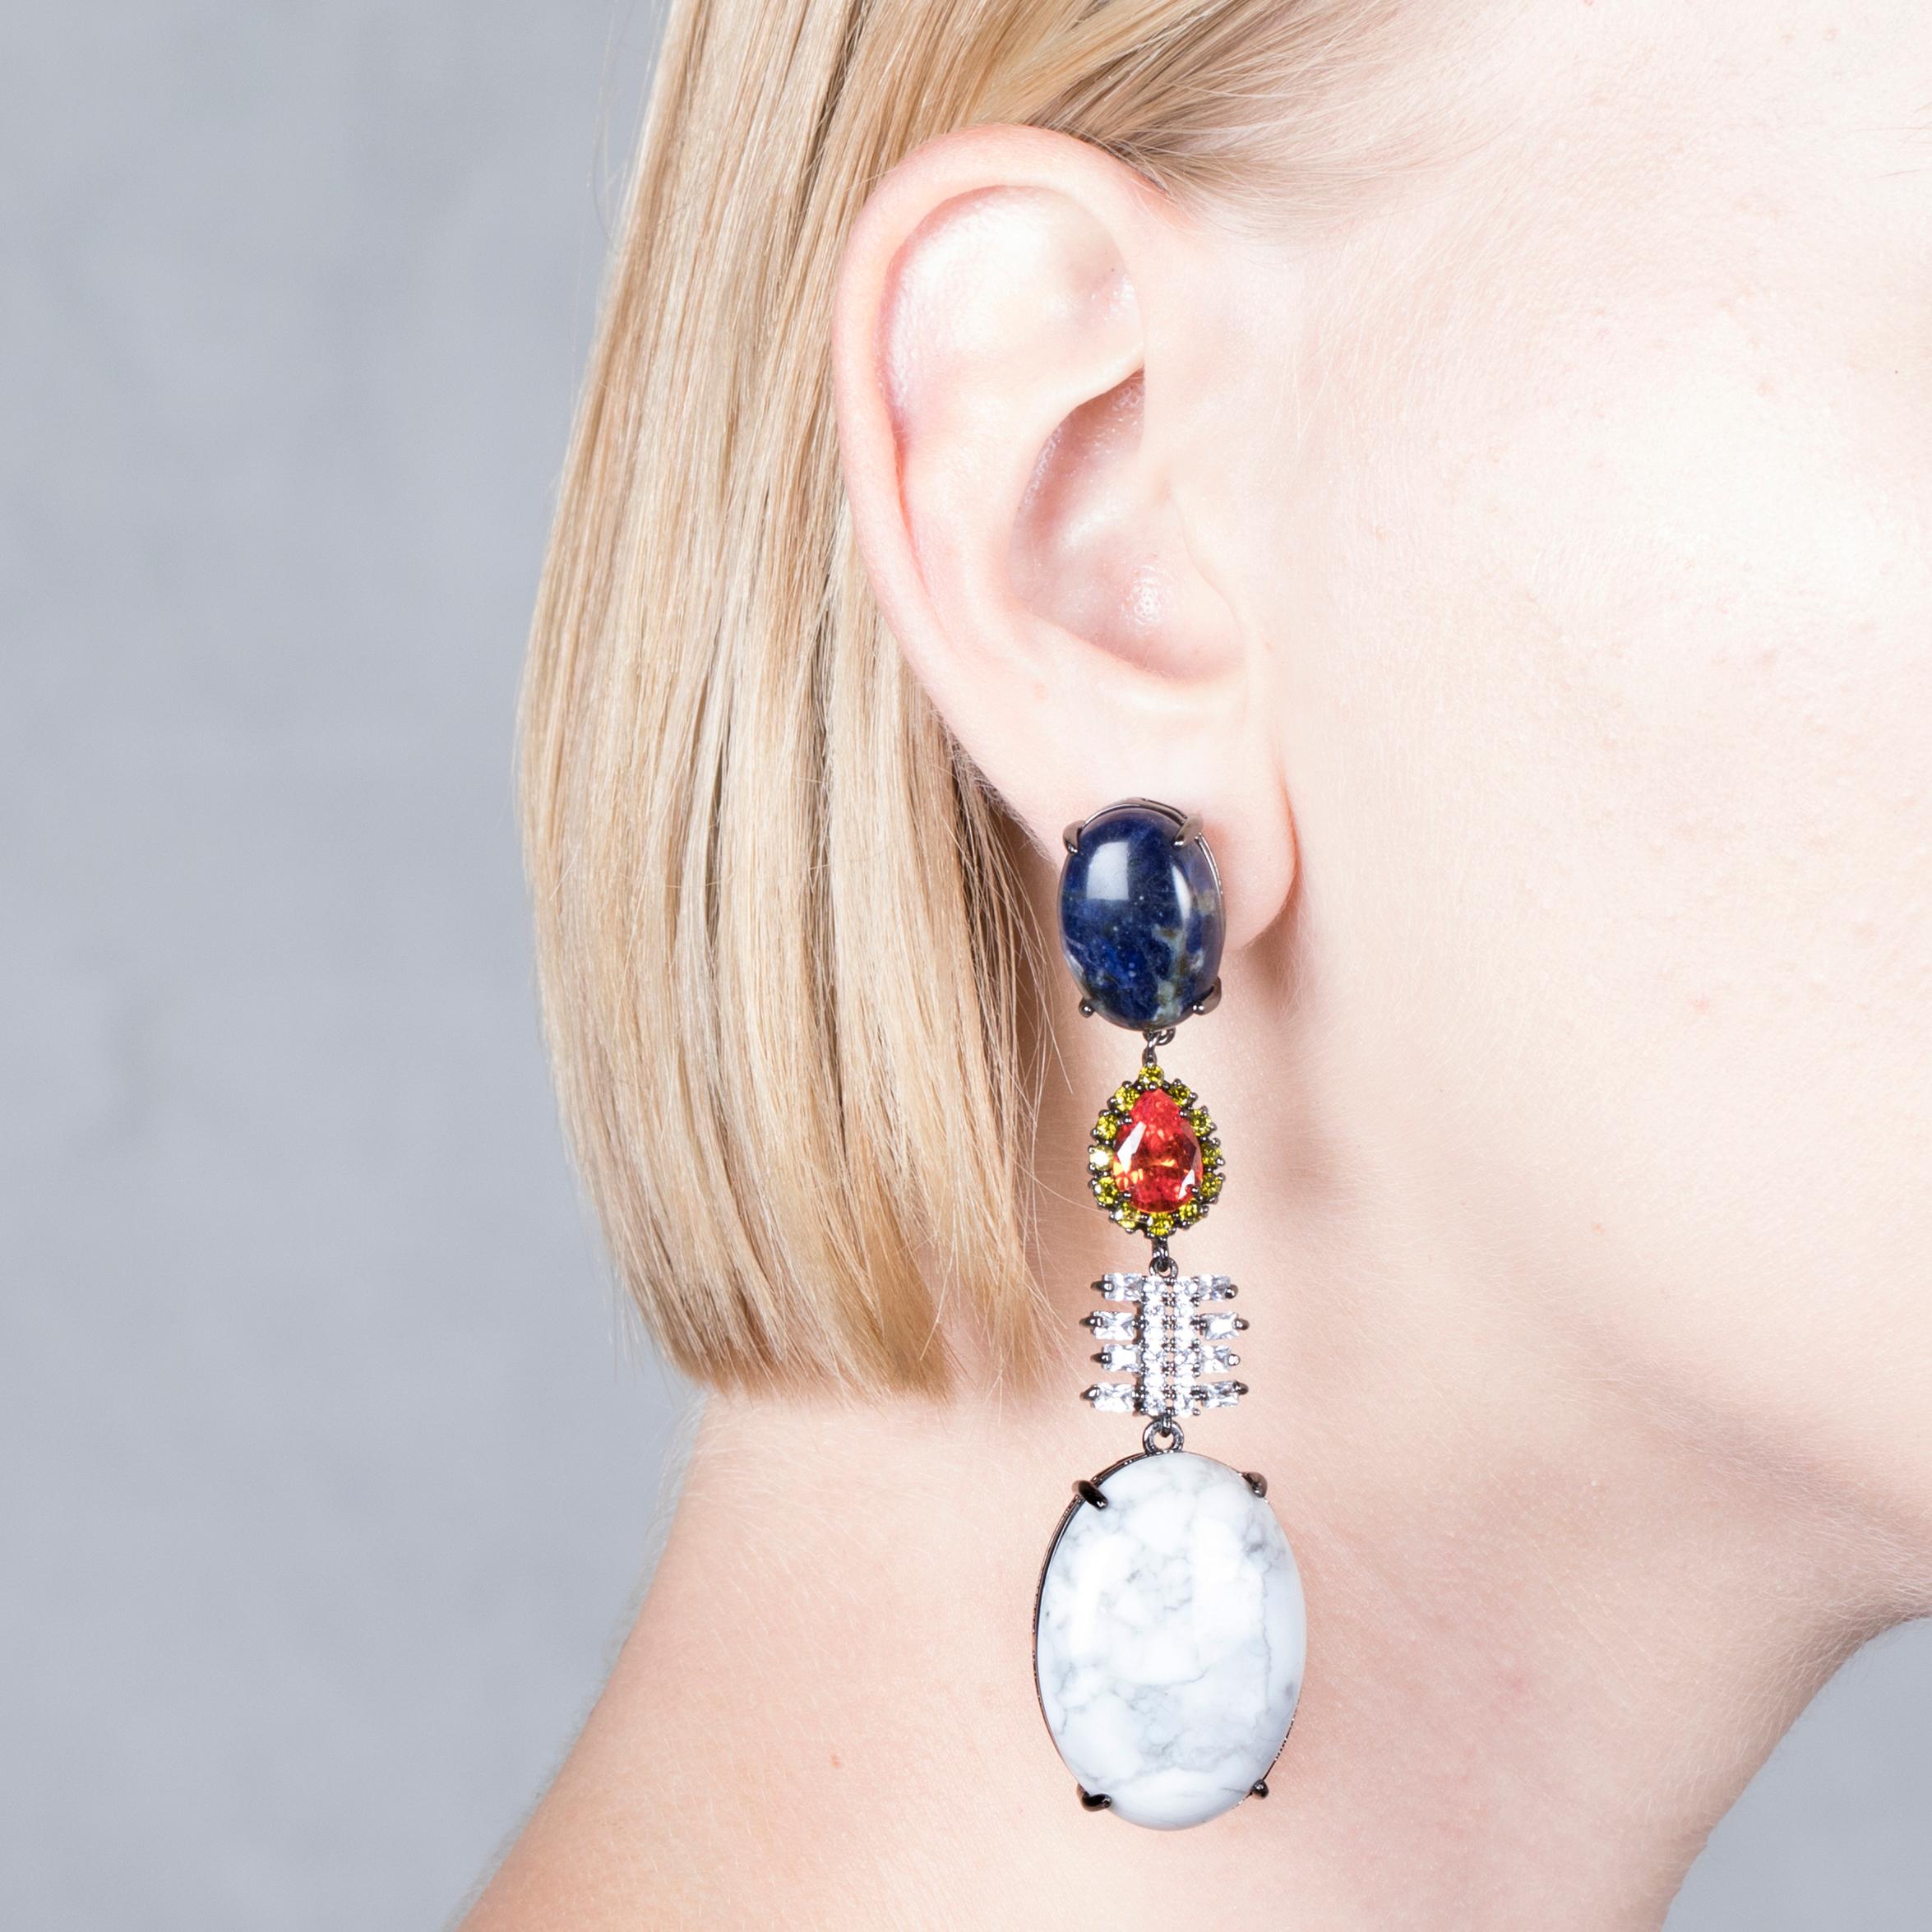 Contemporary Iosselliani White Turquoise and Sodalite Dangling Earring Pair For Sale